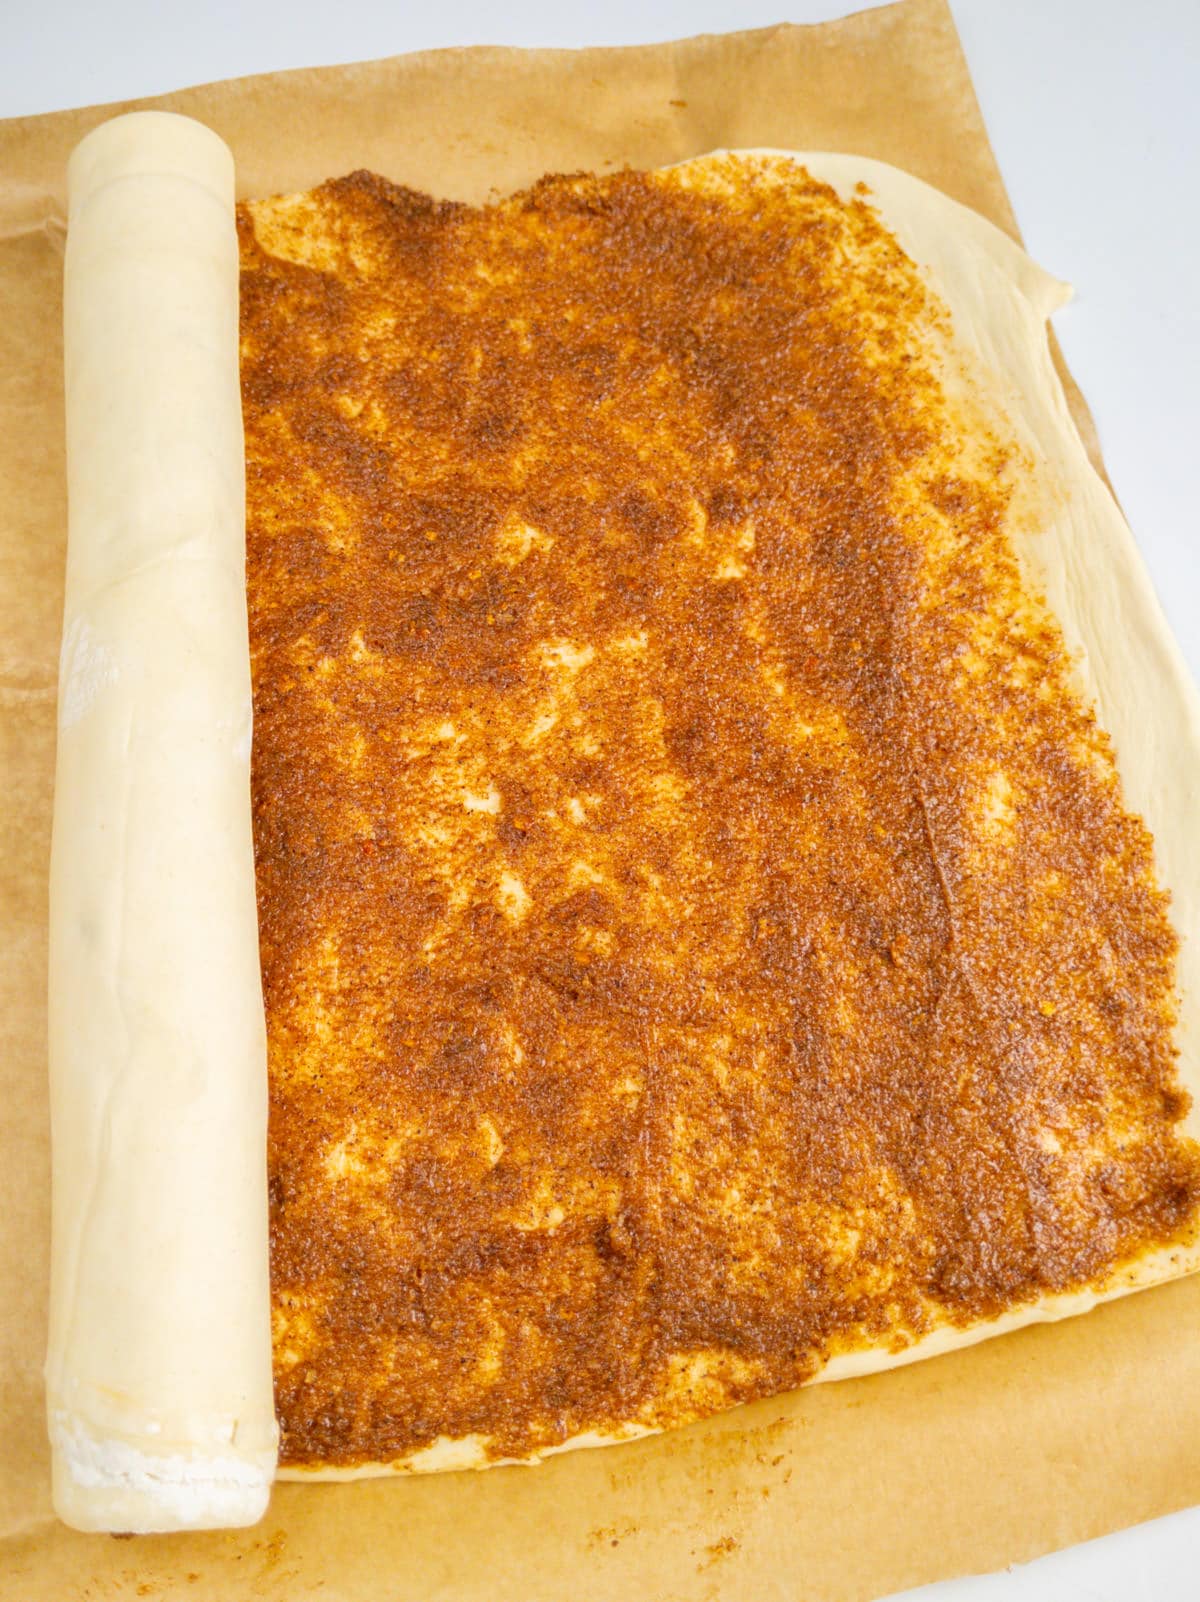 Pastry dough on a baking paper covered with cinnamon pasta.